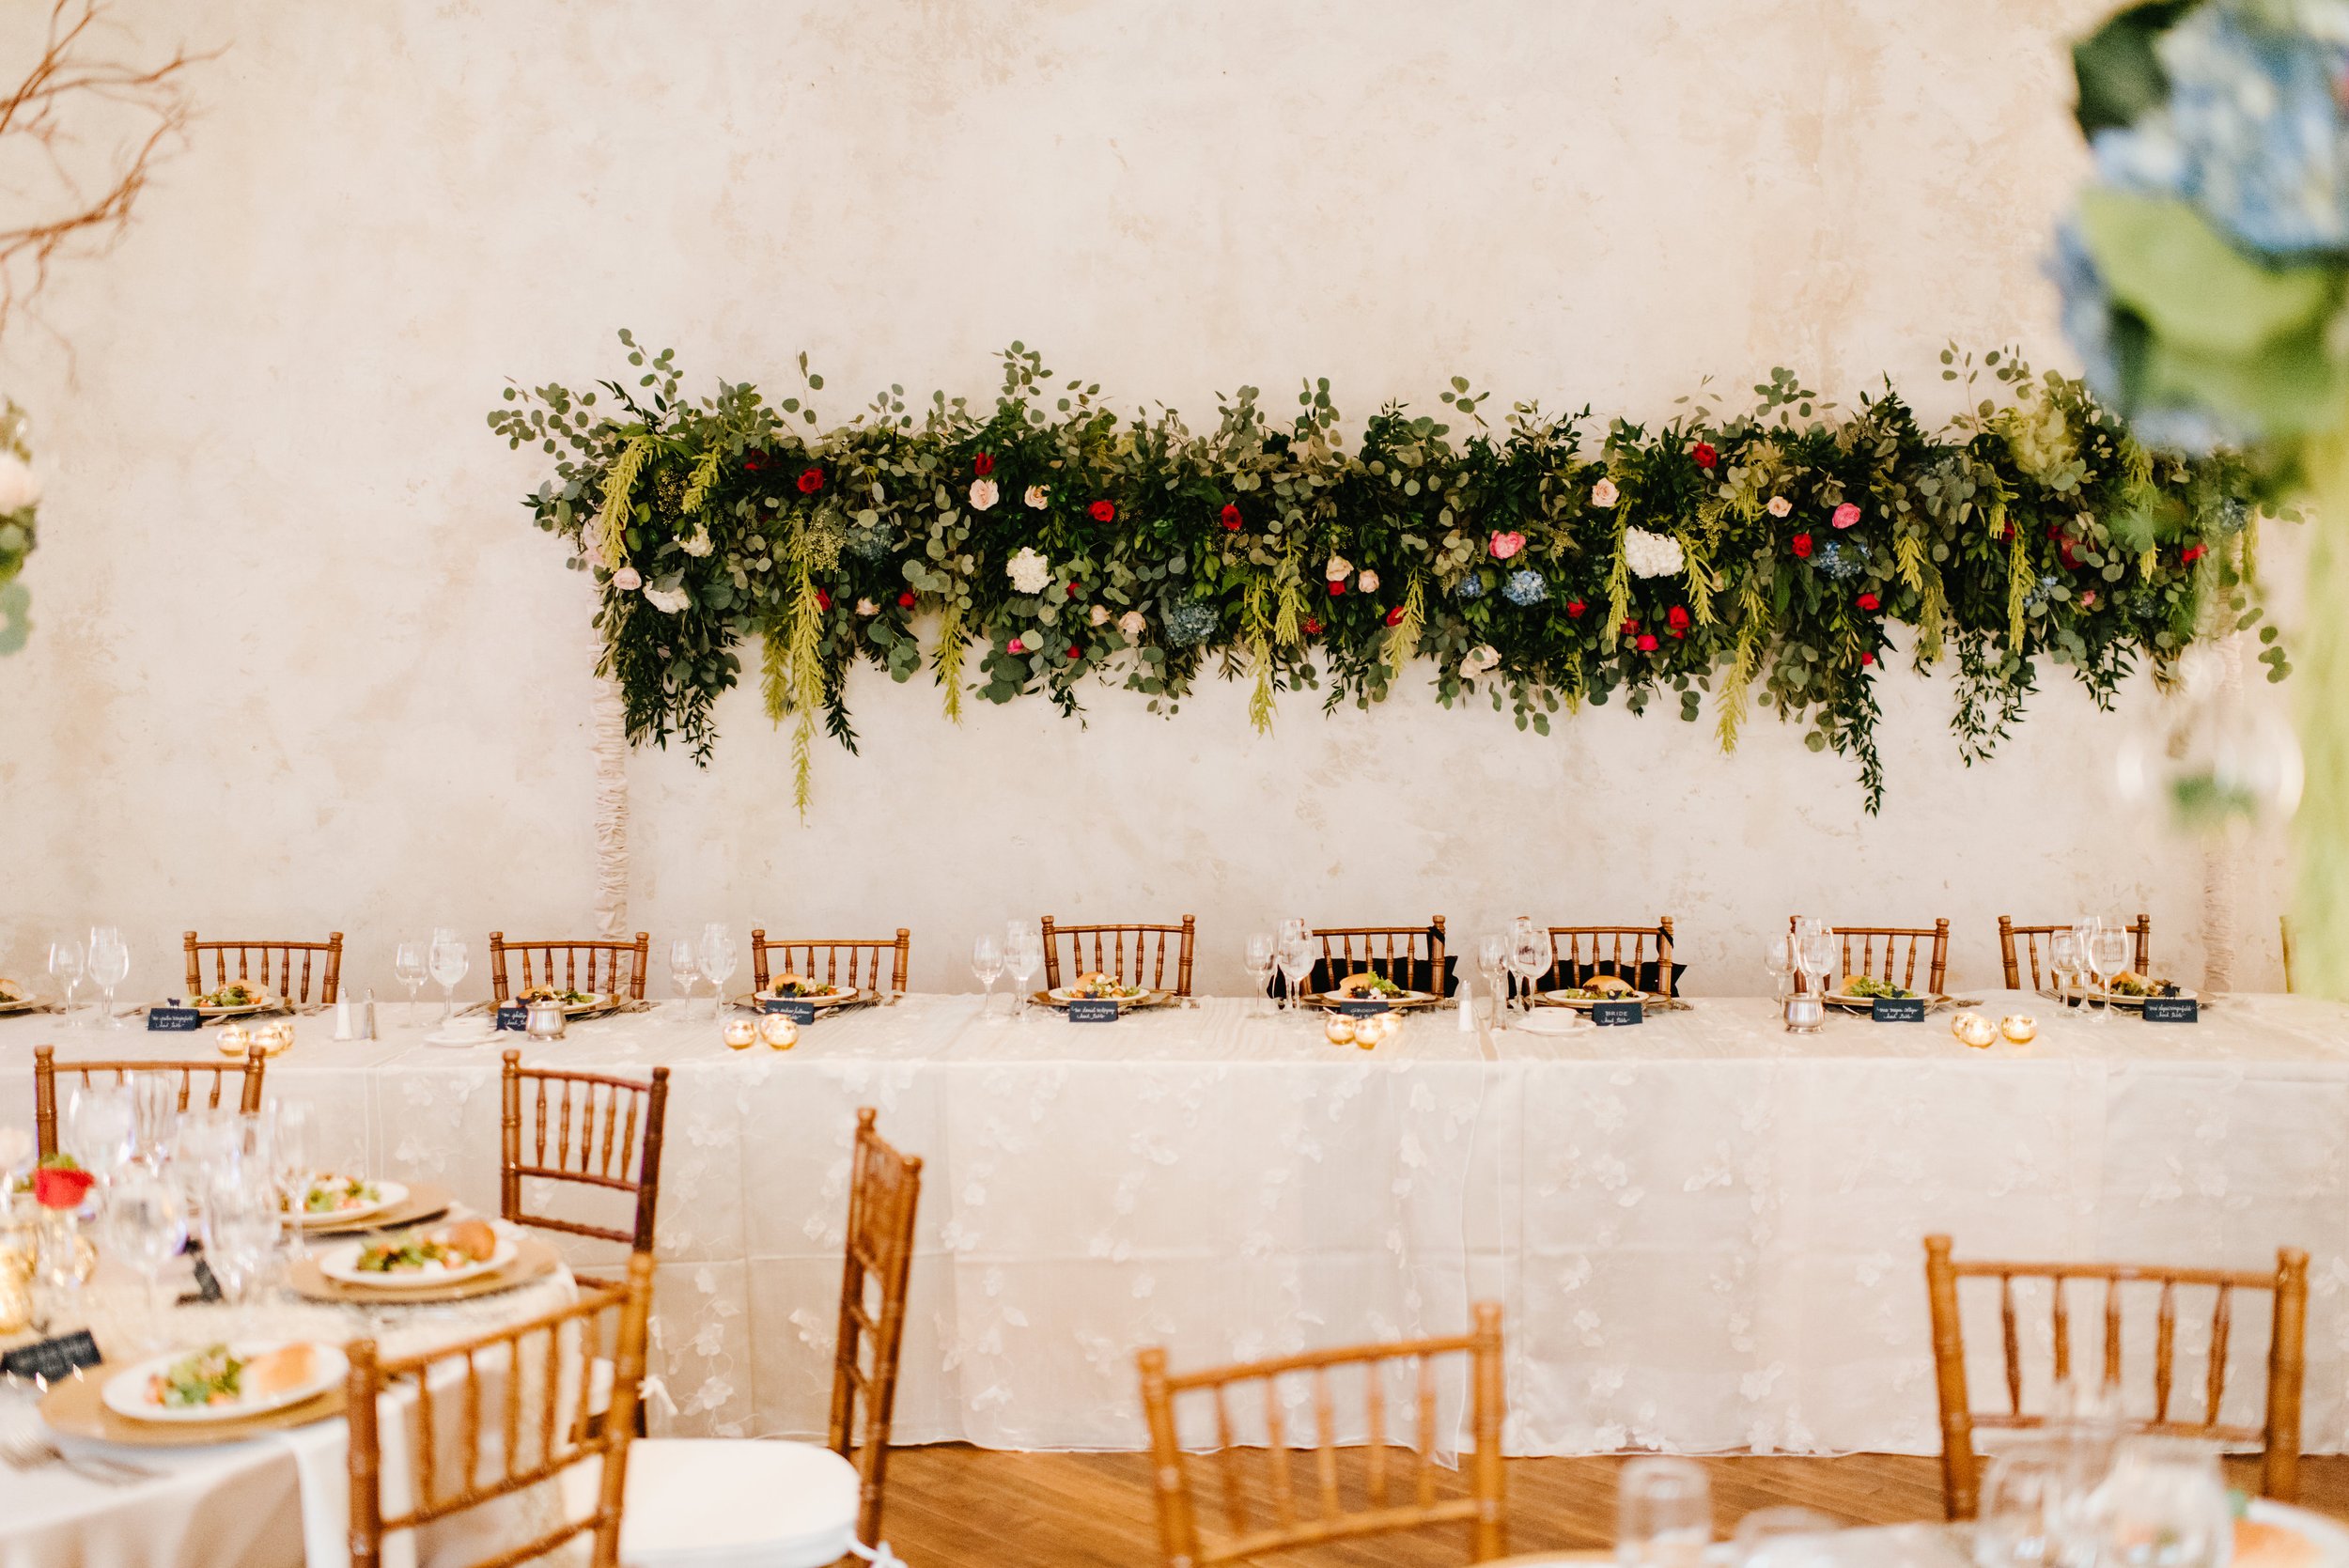 Dinner table with long hanging greenery decor and wooden chairs